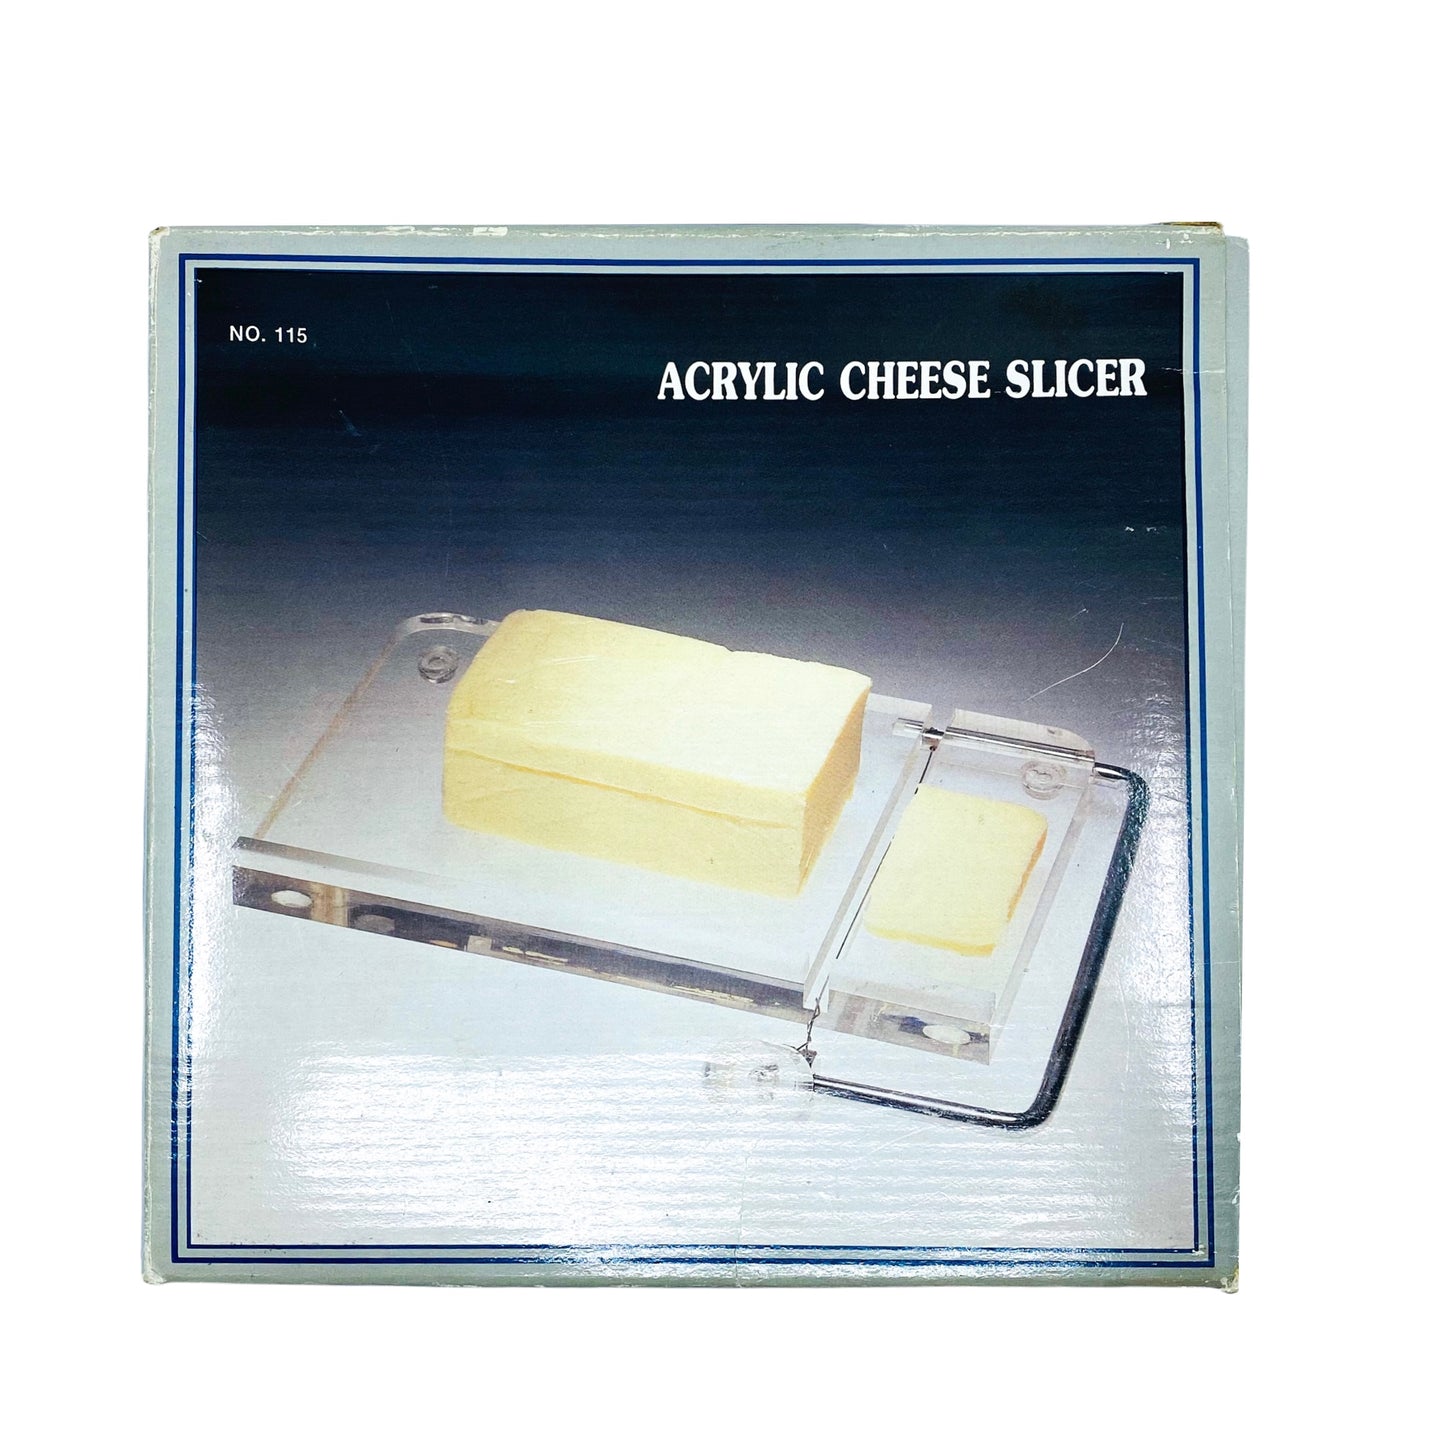 Vintage Acrylic Cheese Display / Slicer, New in Box